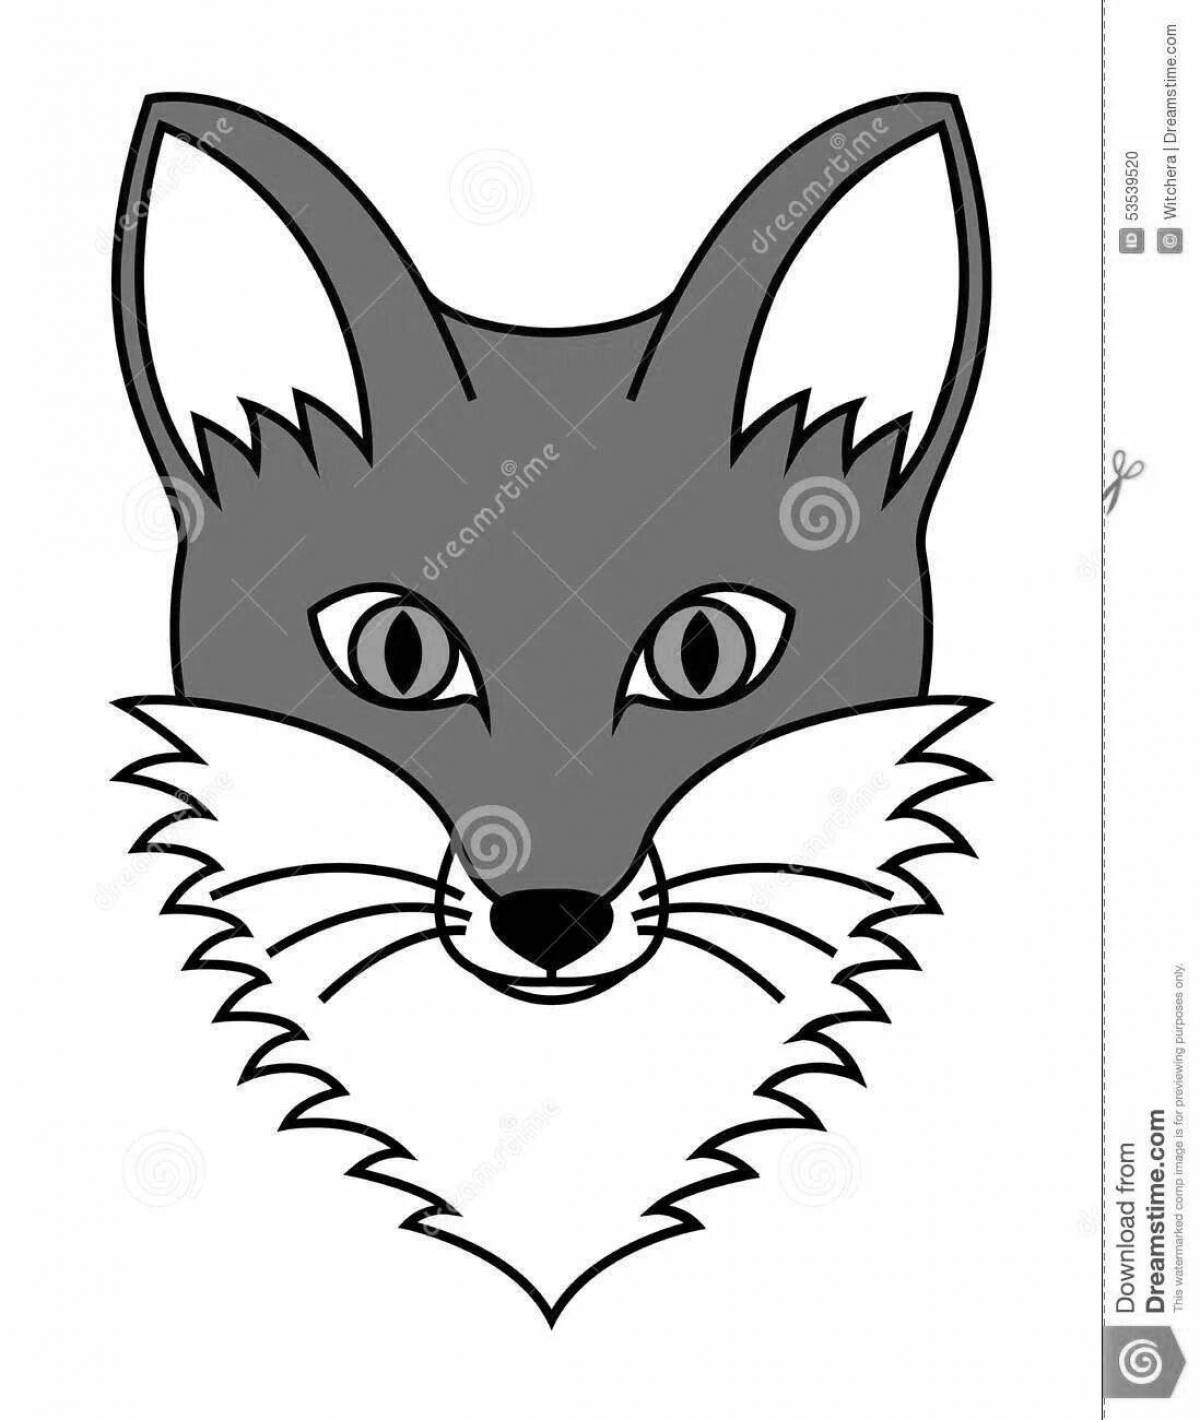 Living fox coloring page